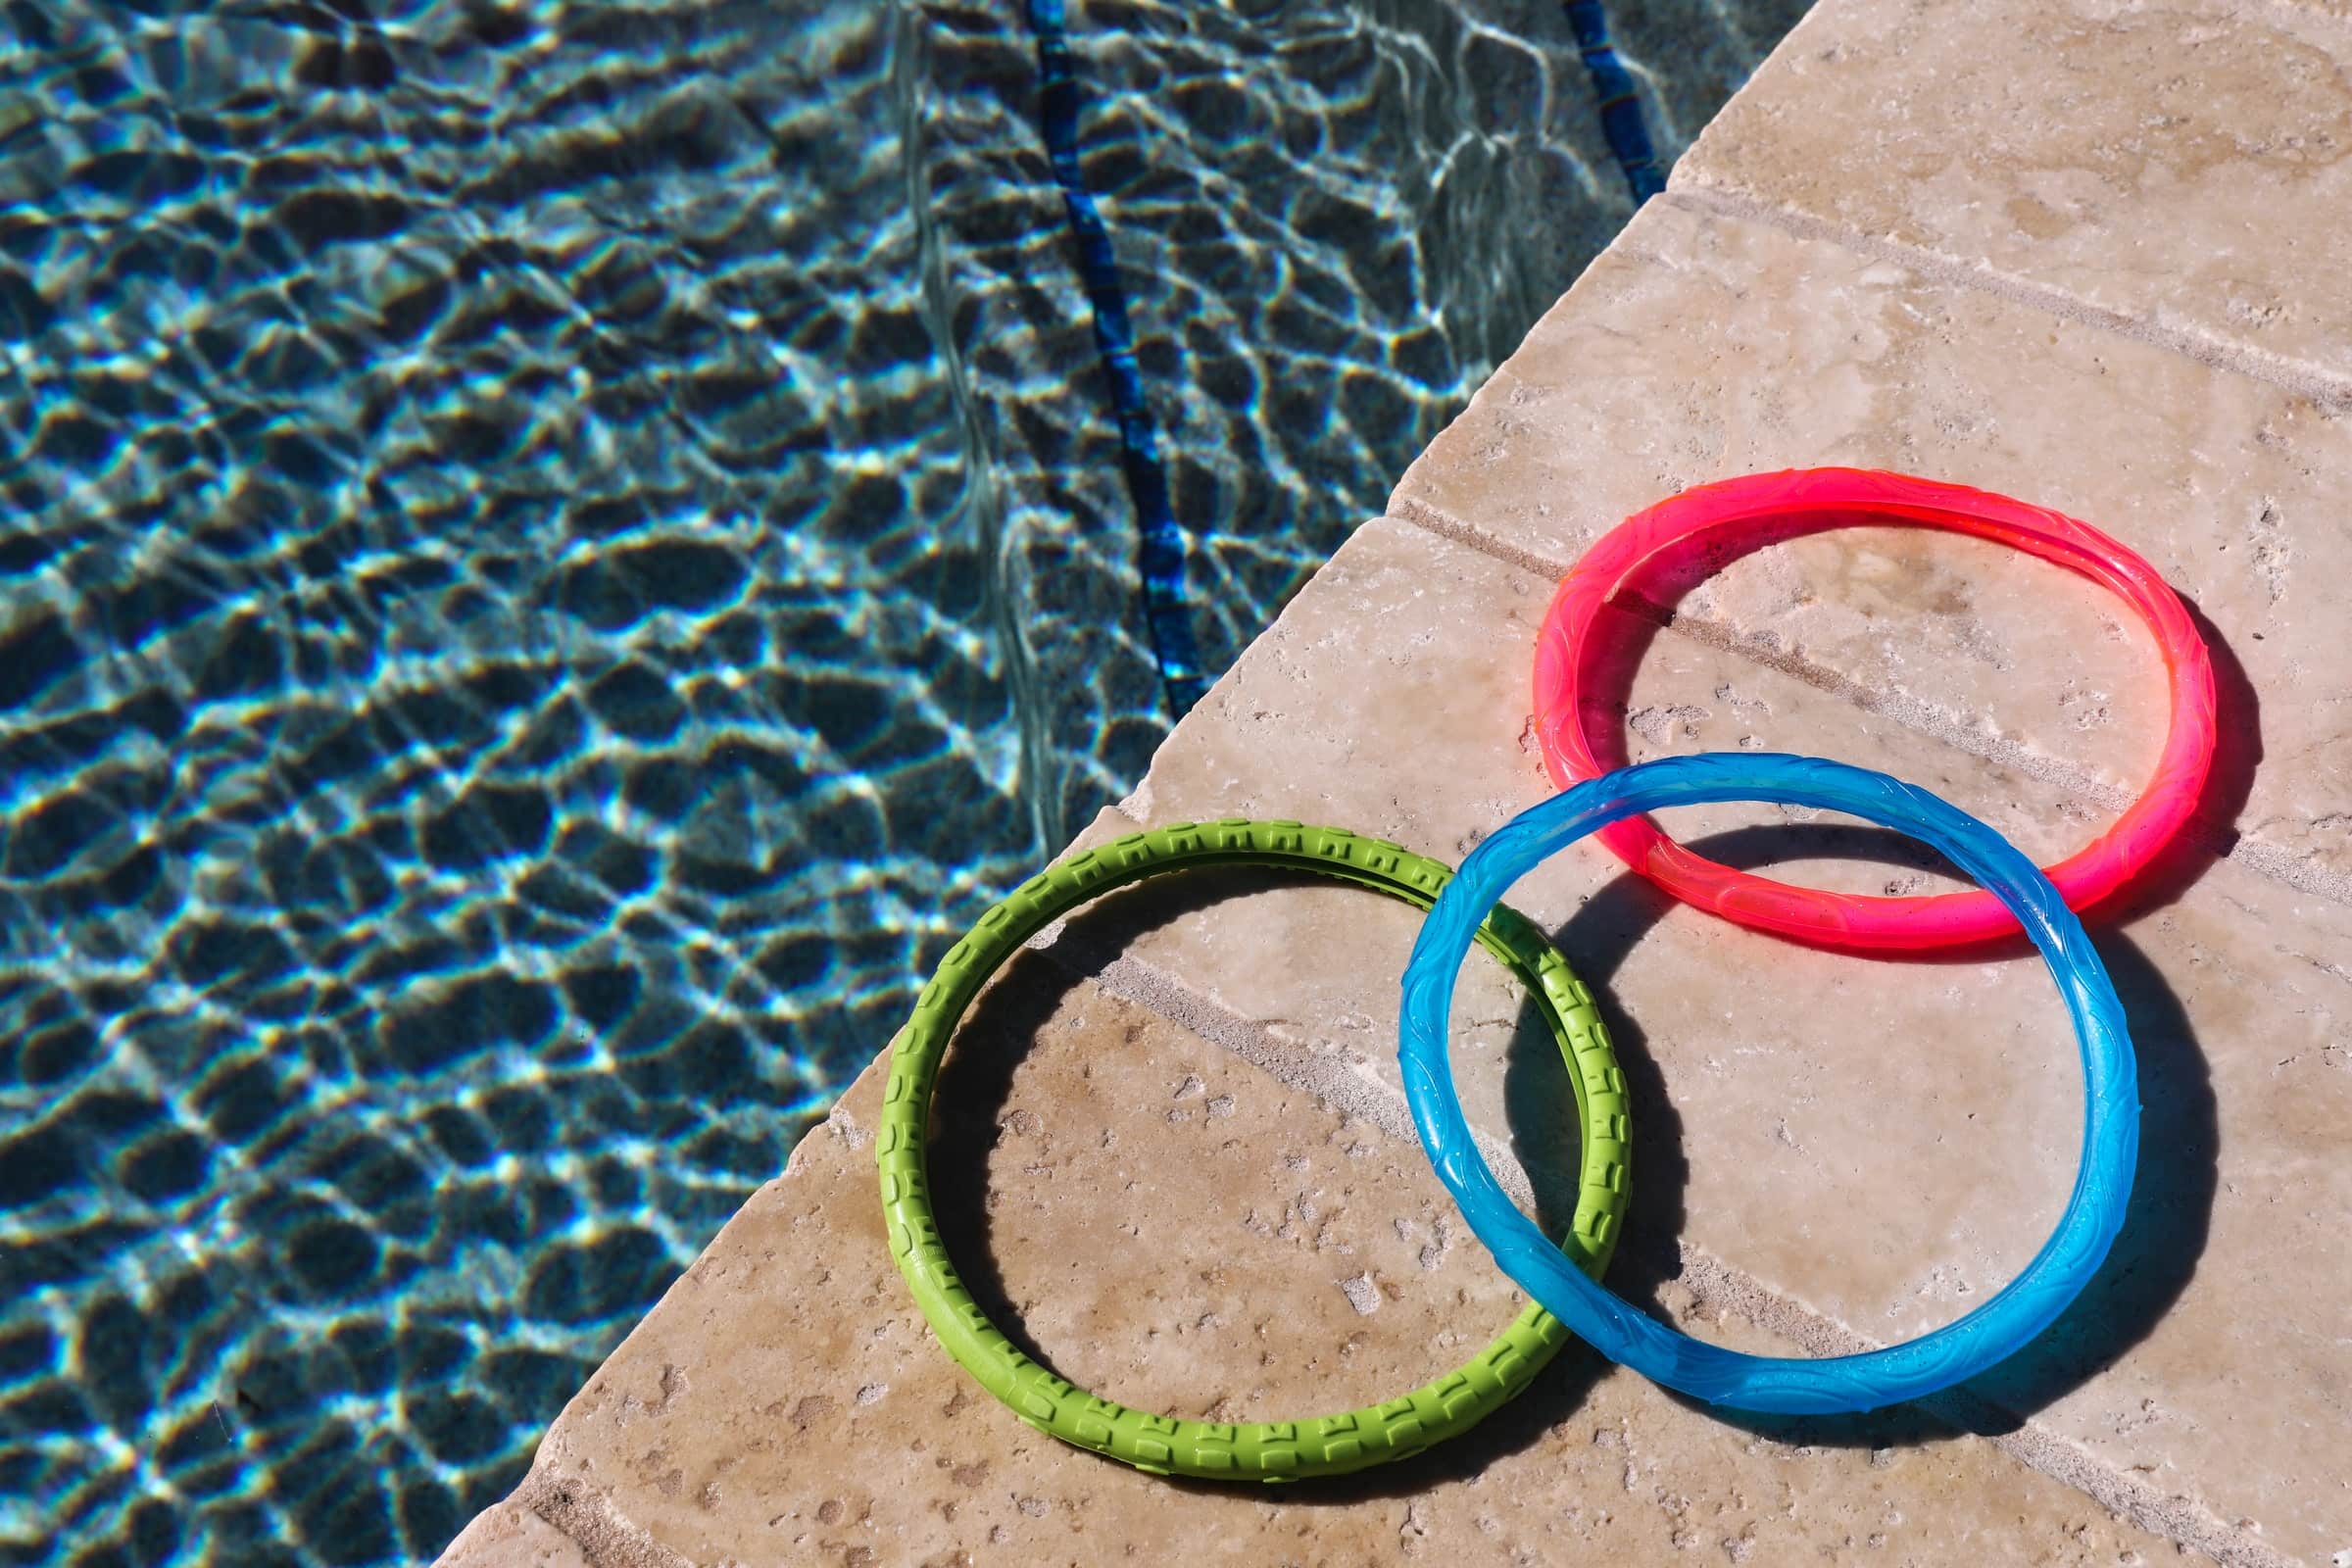 Diving rings next to a pool, overlapping each other like Venn diagrams.